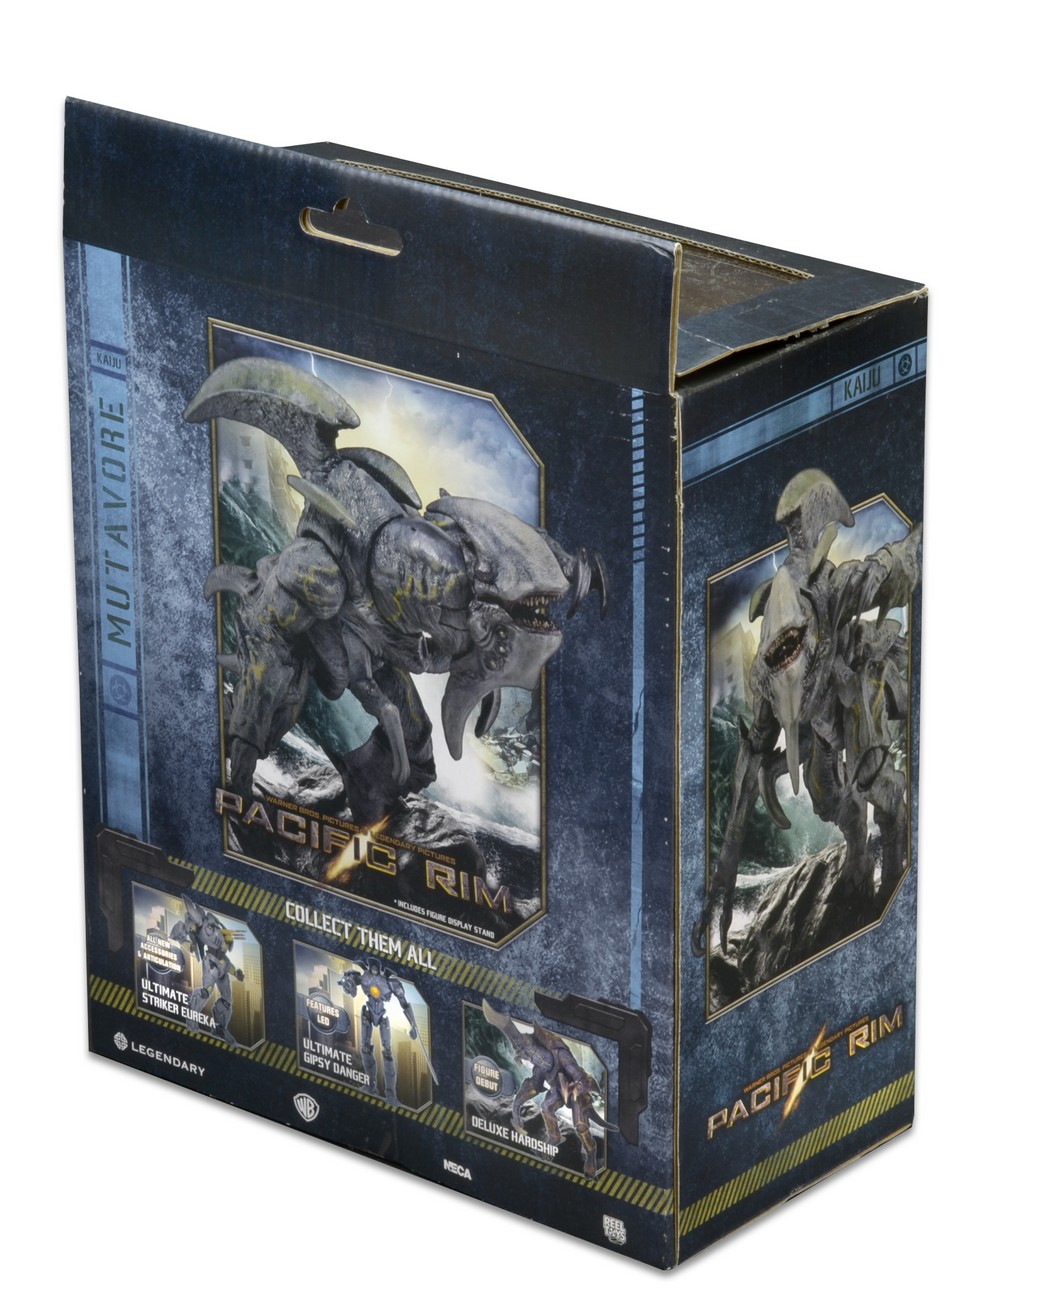 From the epic Pacific Rim movie, our newest boxed, ultra-deluxe kaiju actio...